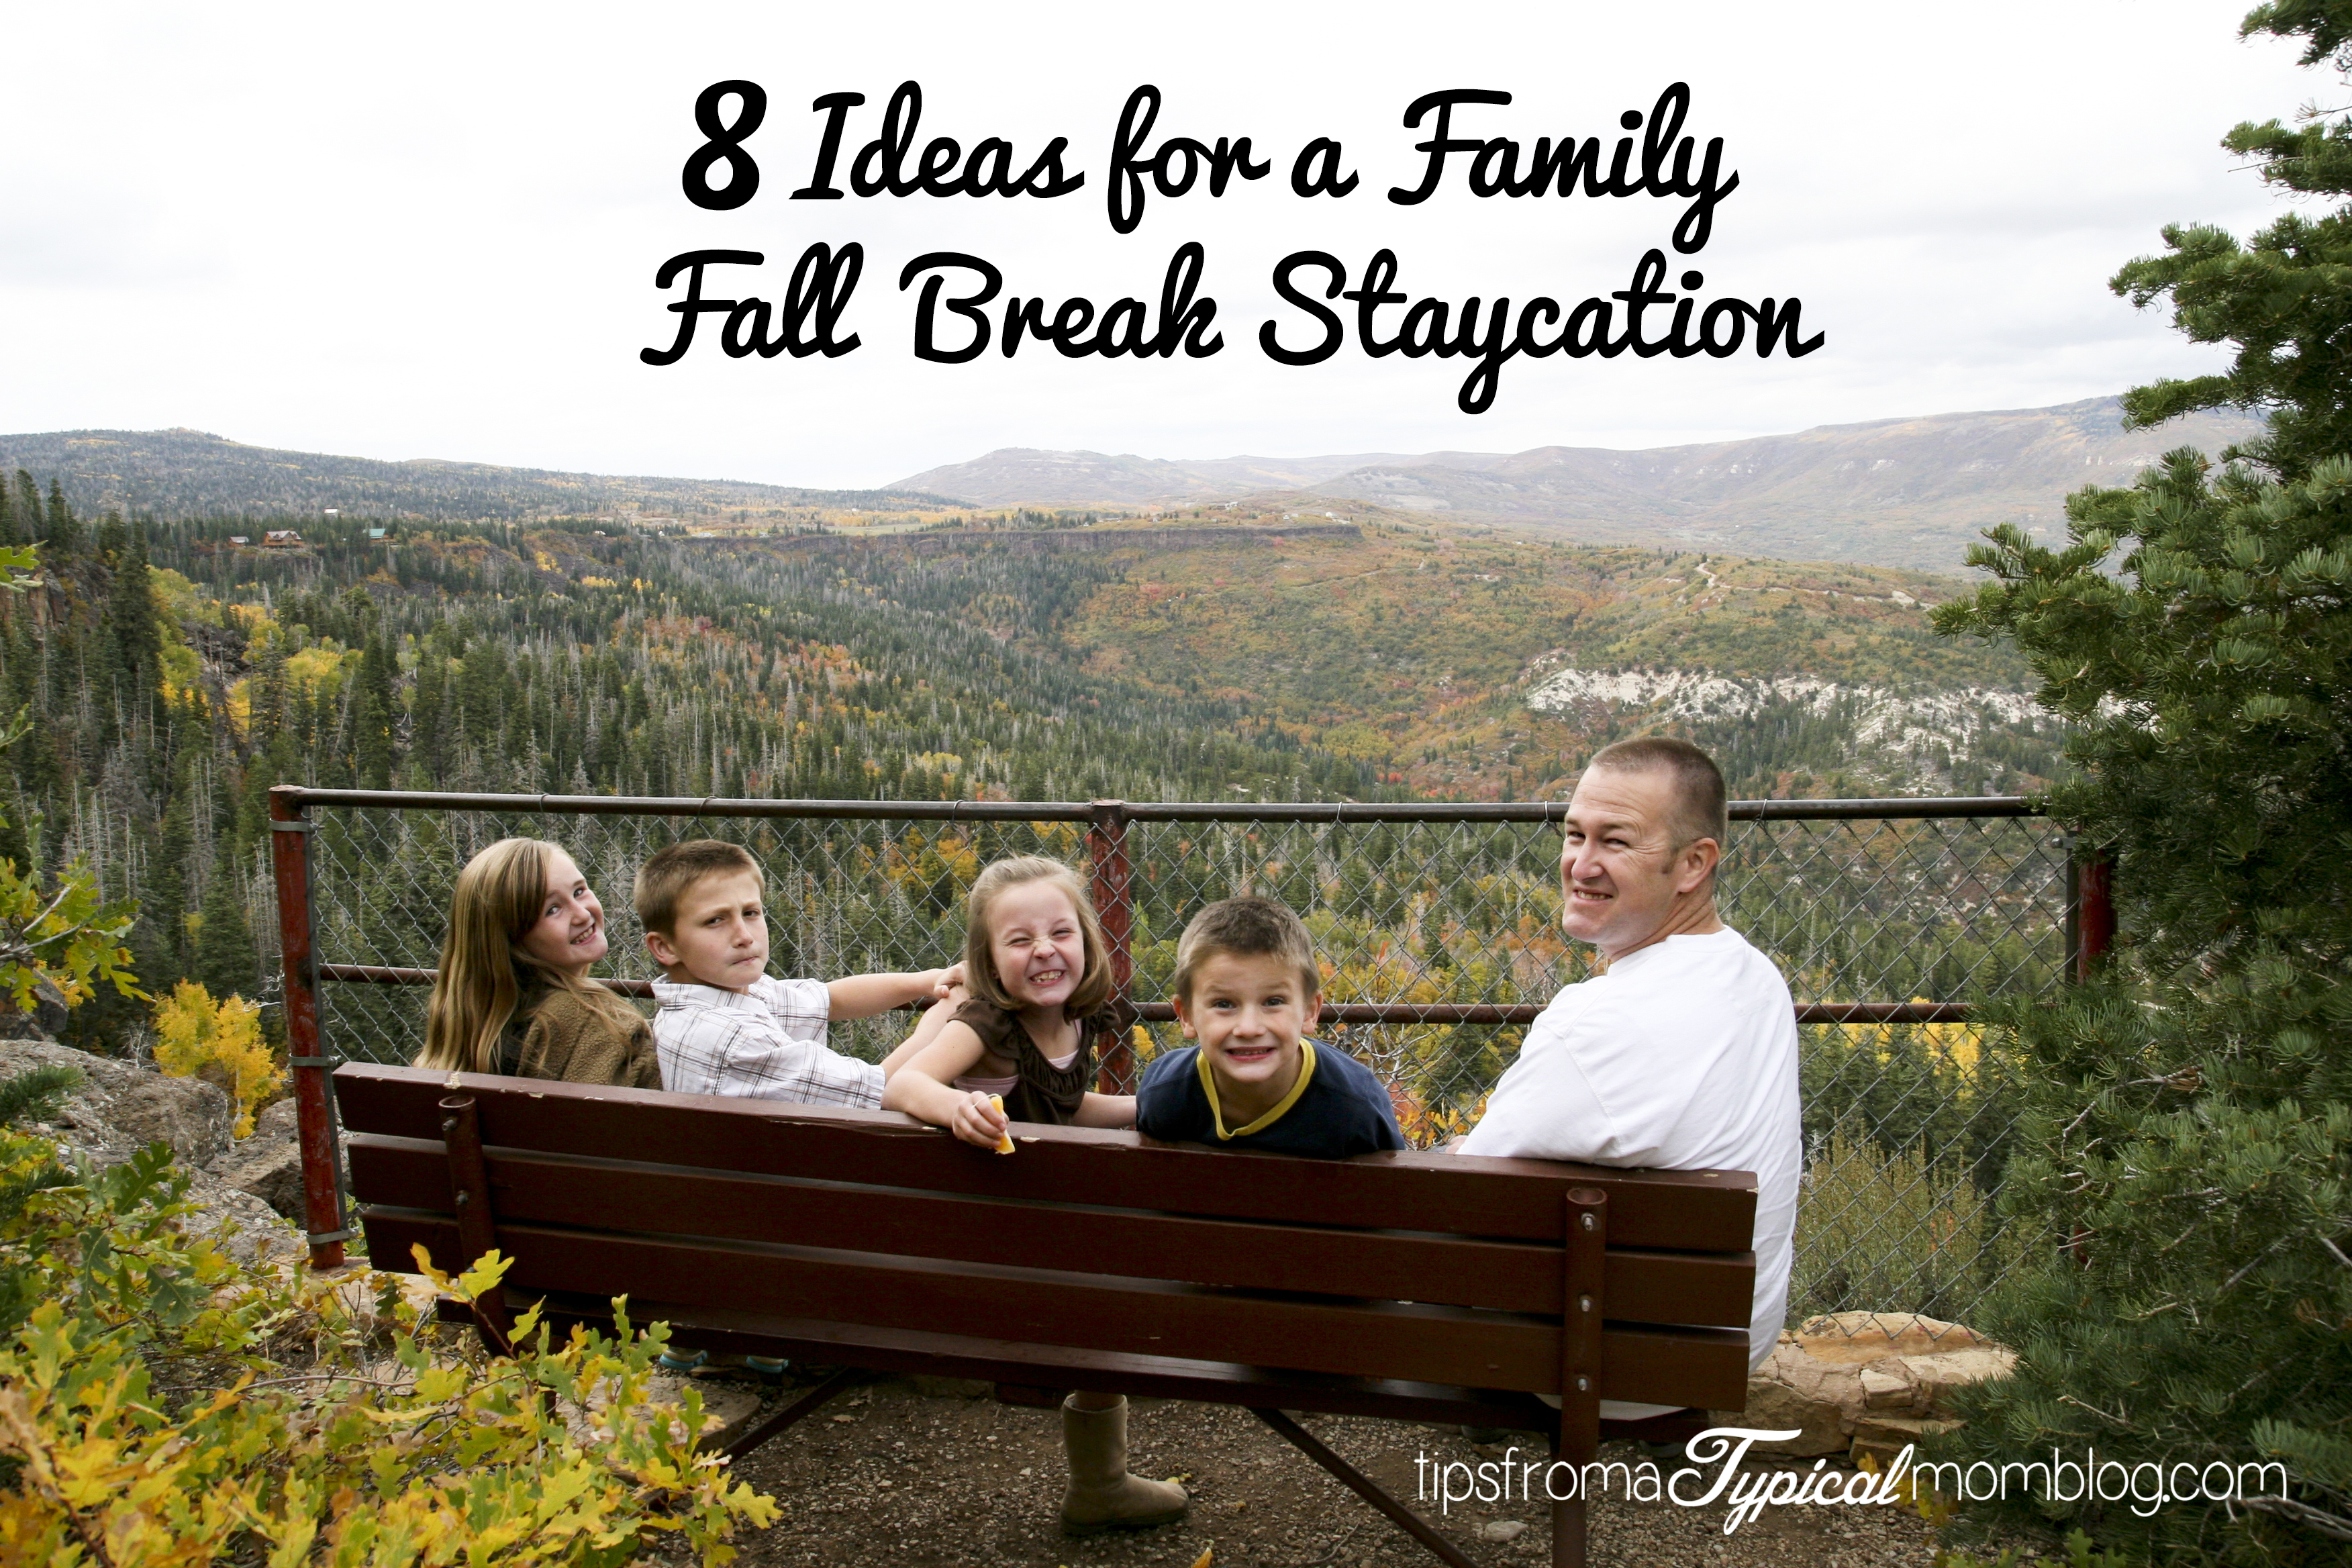 8 Ideas for the Perfect Fall Break Family Staycation + Hotel Stay Giveaway!